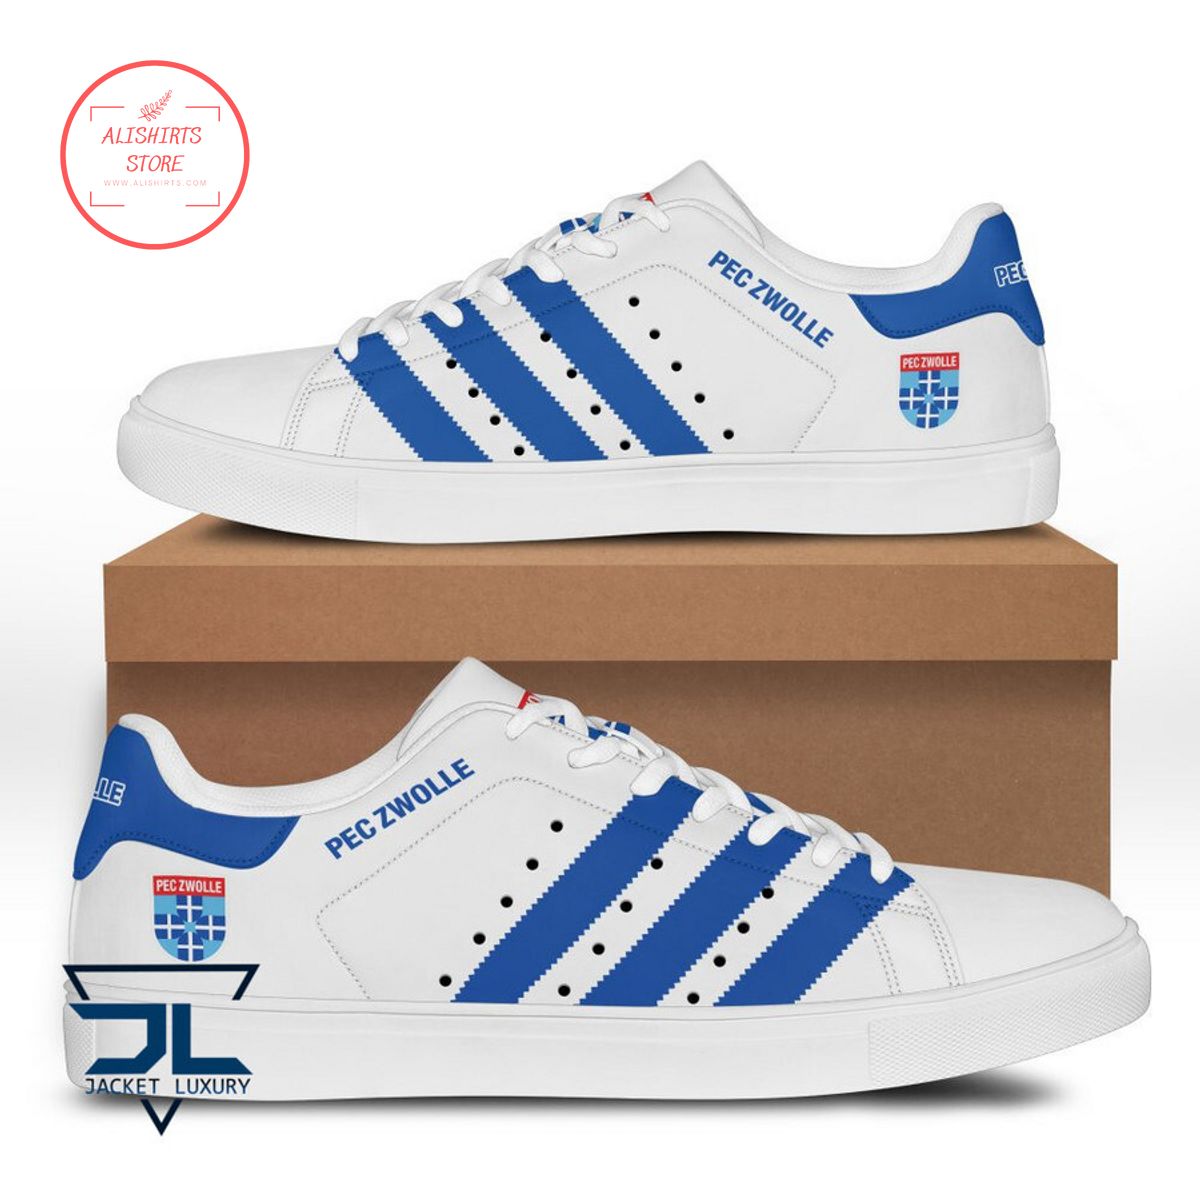 PEC Zwolle Stan Smith Shoes